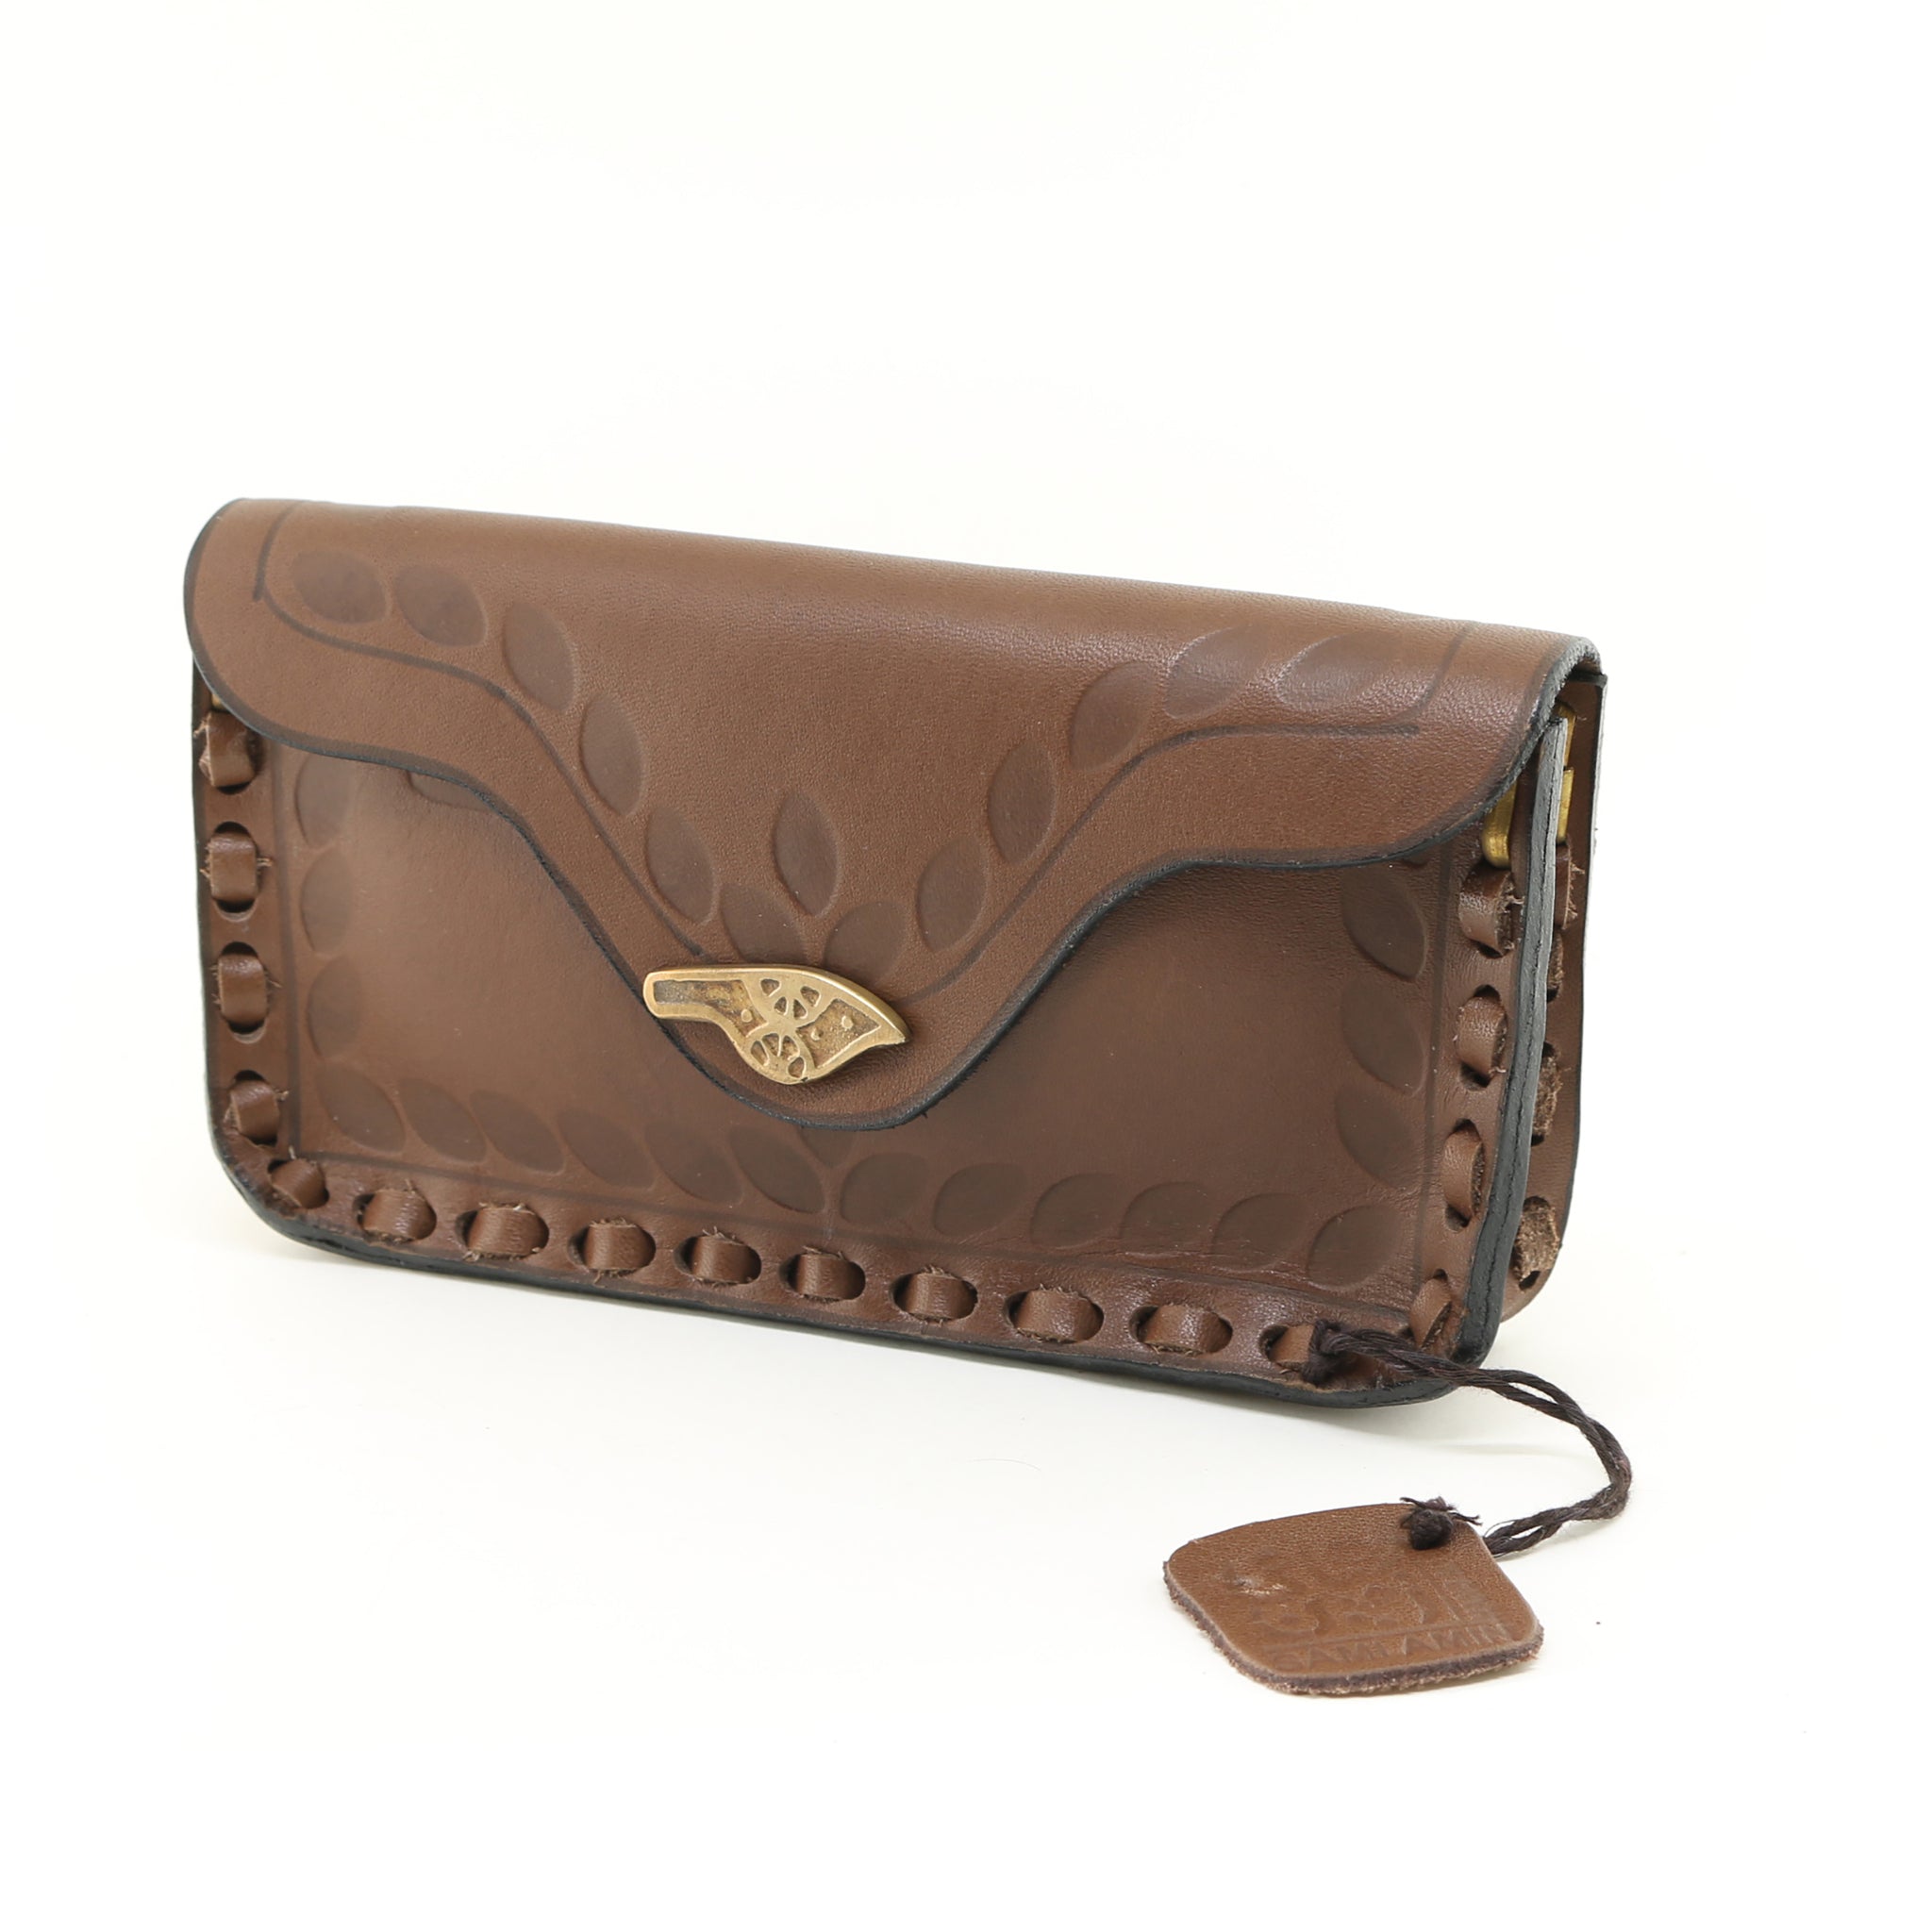 Vintage Tooled Leather Coin Purse